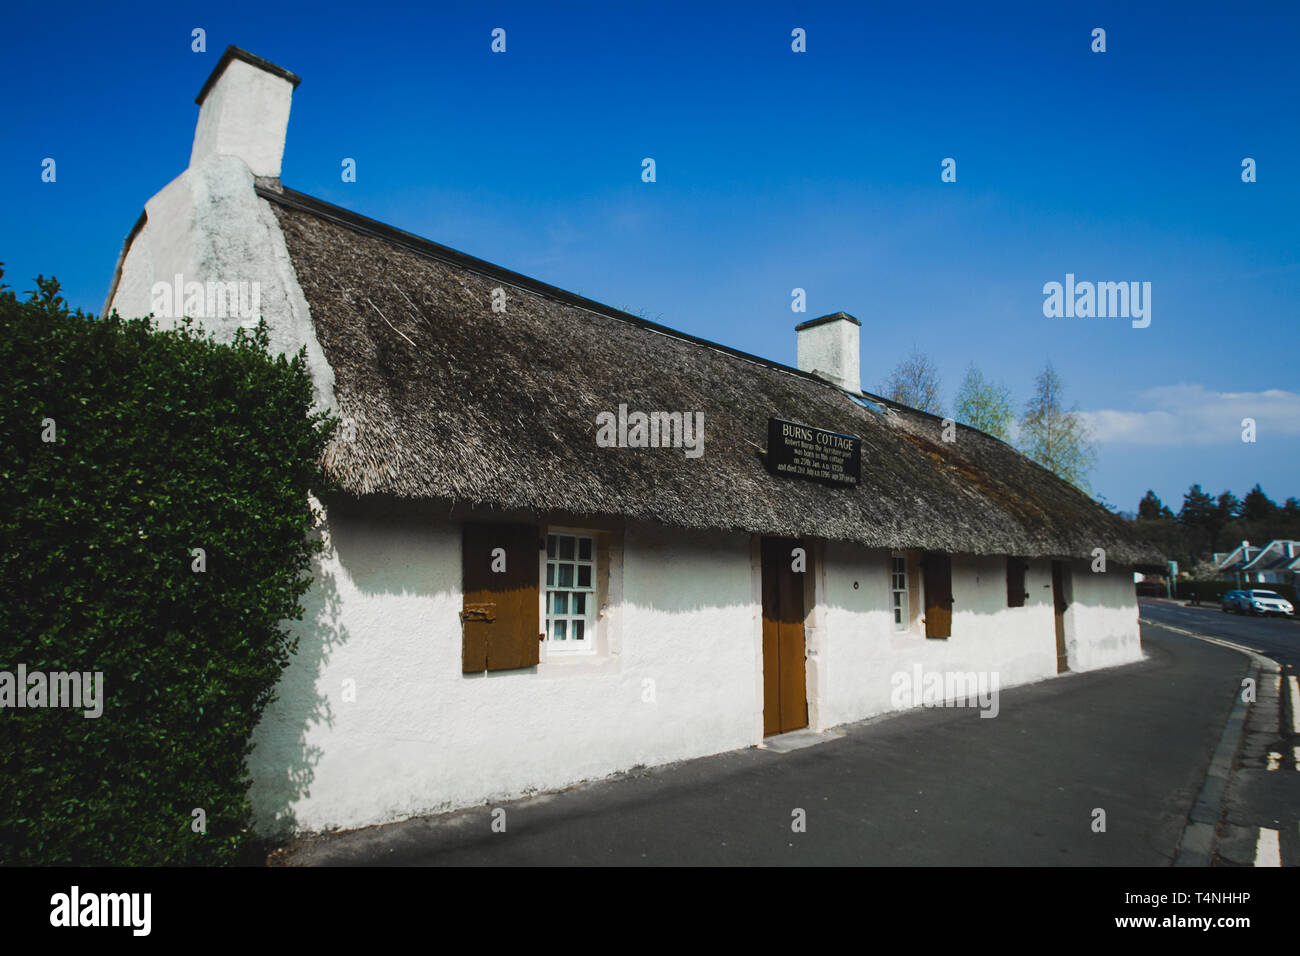 Robert Burns Birthplace Museum, Alloway, Ecosse Banque D'Images